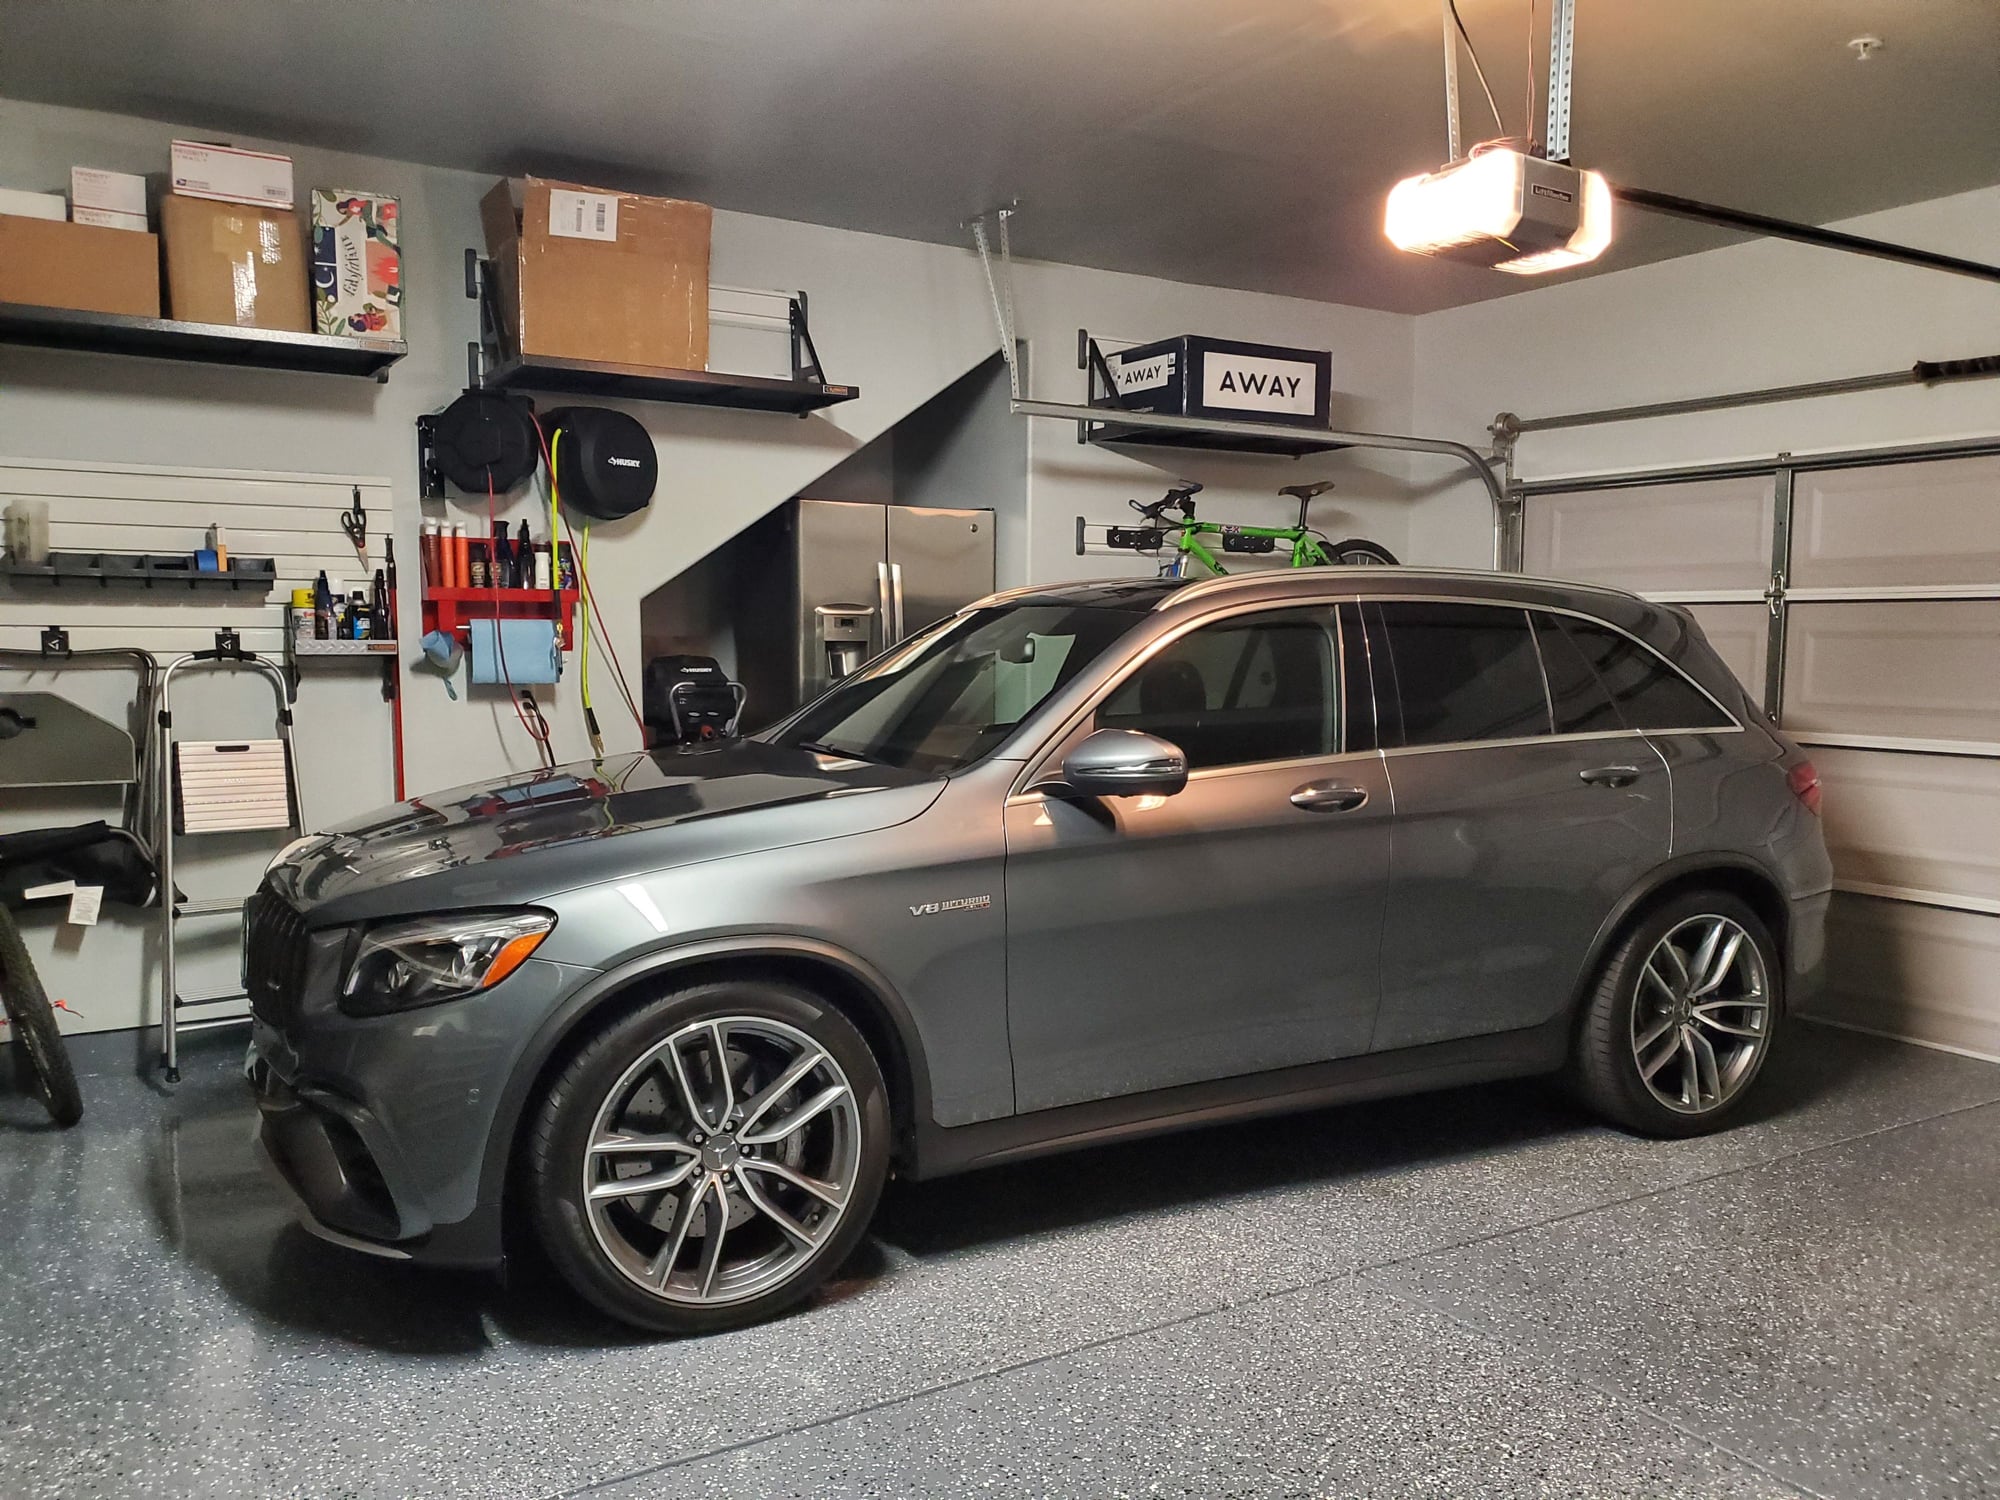 Wheels and Tires/Axles - FS OEM 21 inch GLC63 AMG wheels with Pzero tires - Used - 2017 to 2019 Mercedes-Benz GLC63 AMG - Dublin, CA 94568, United States